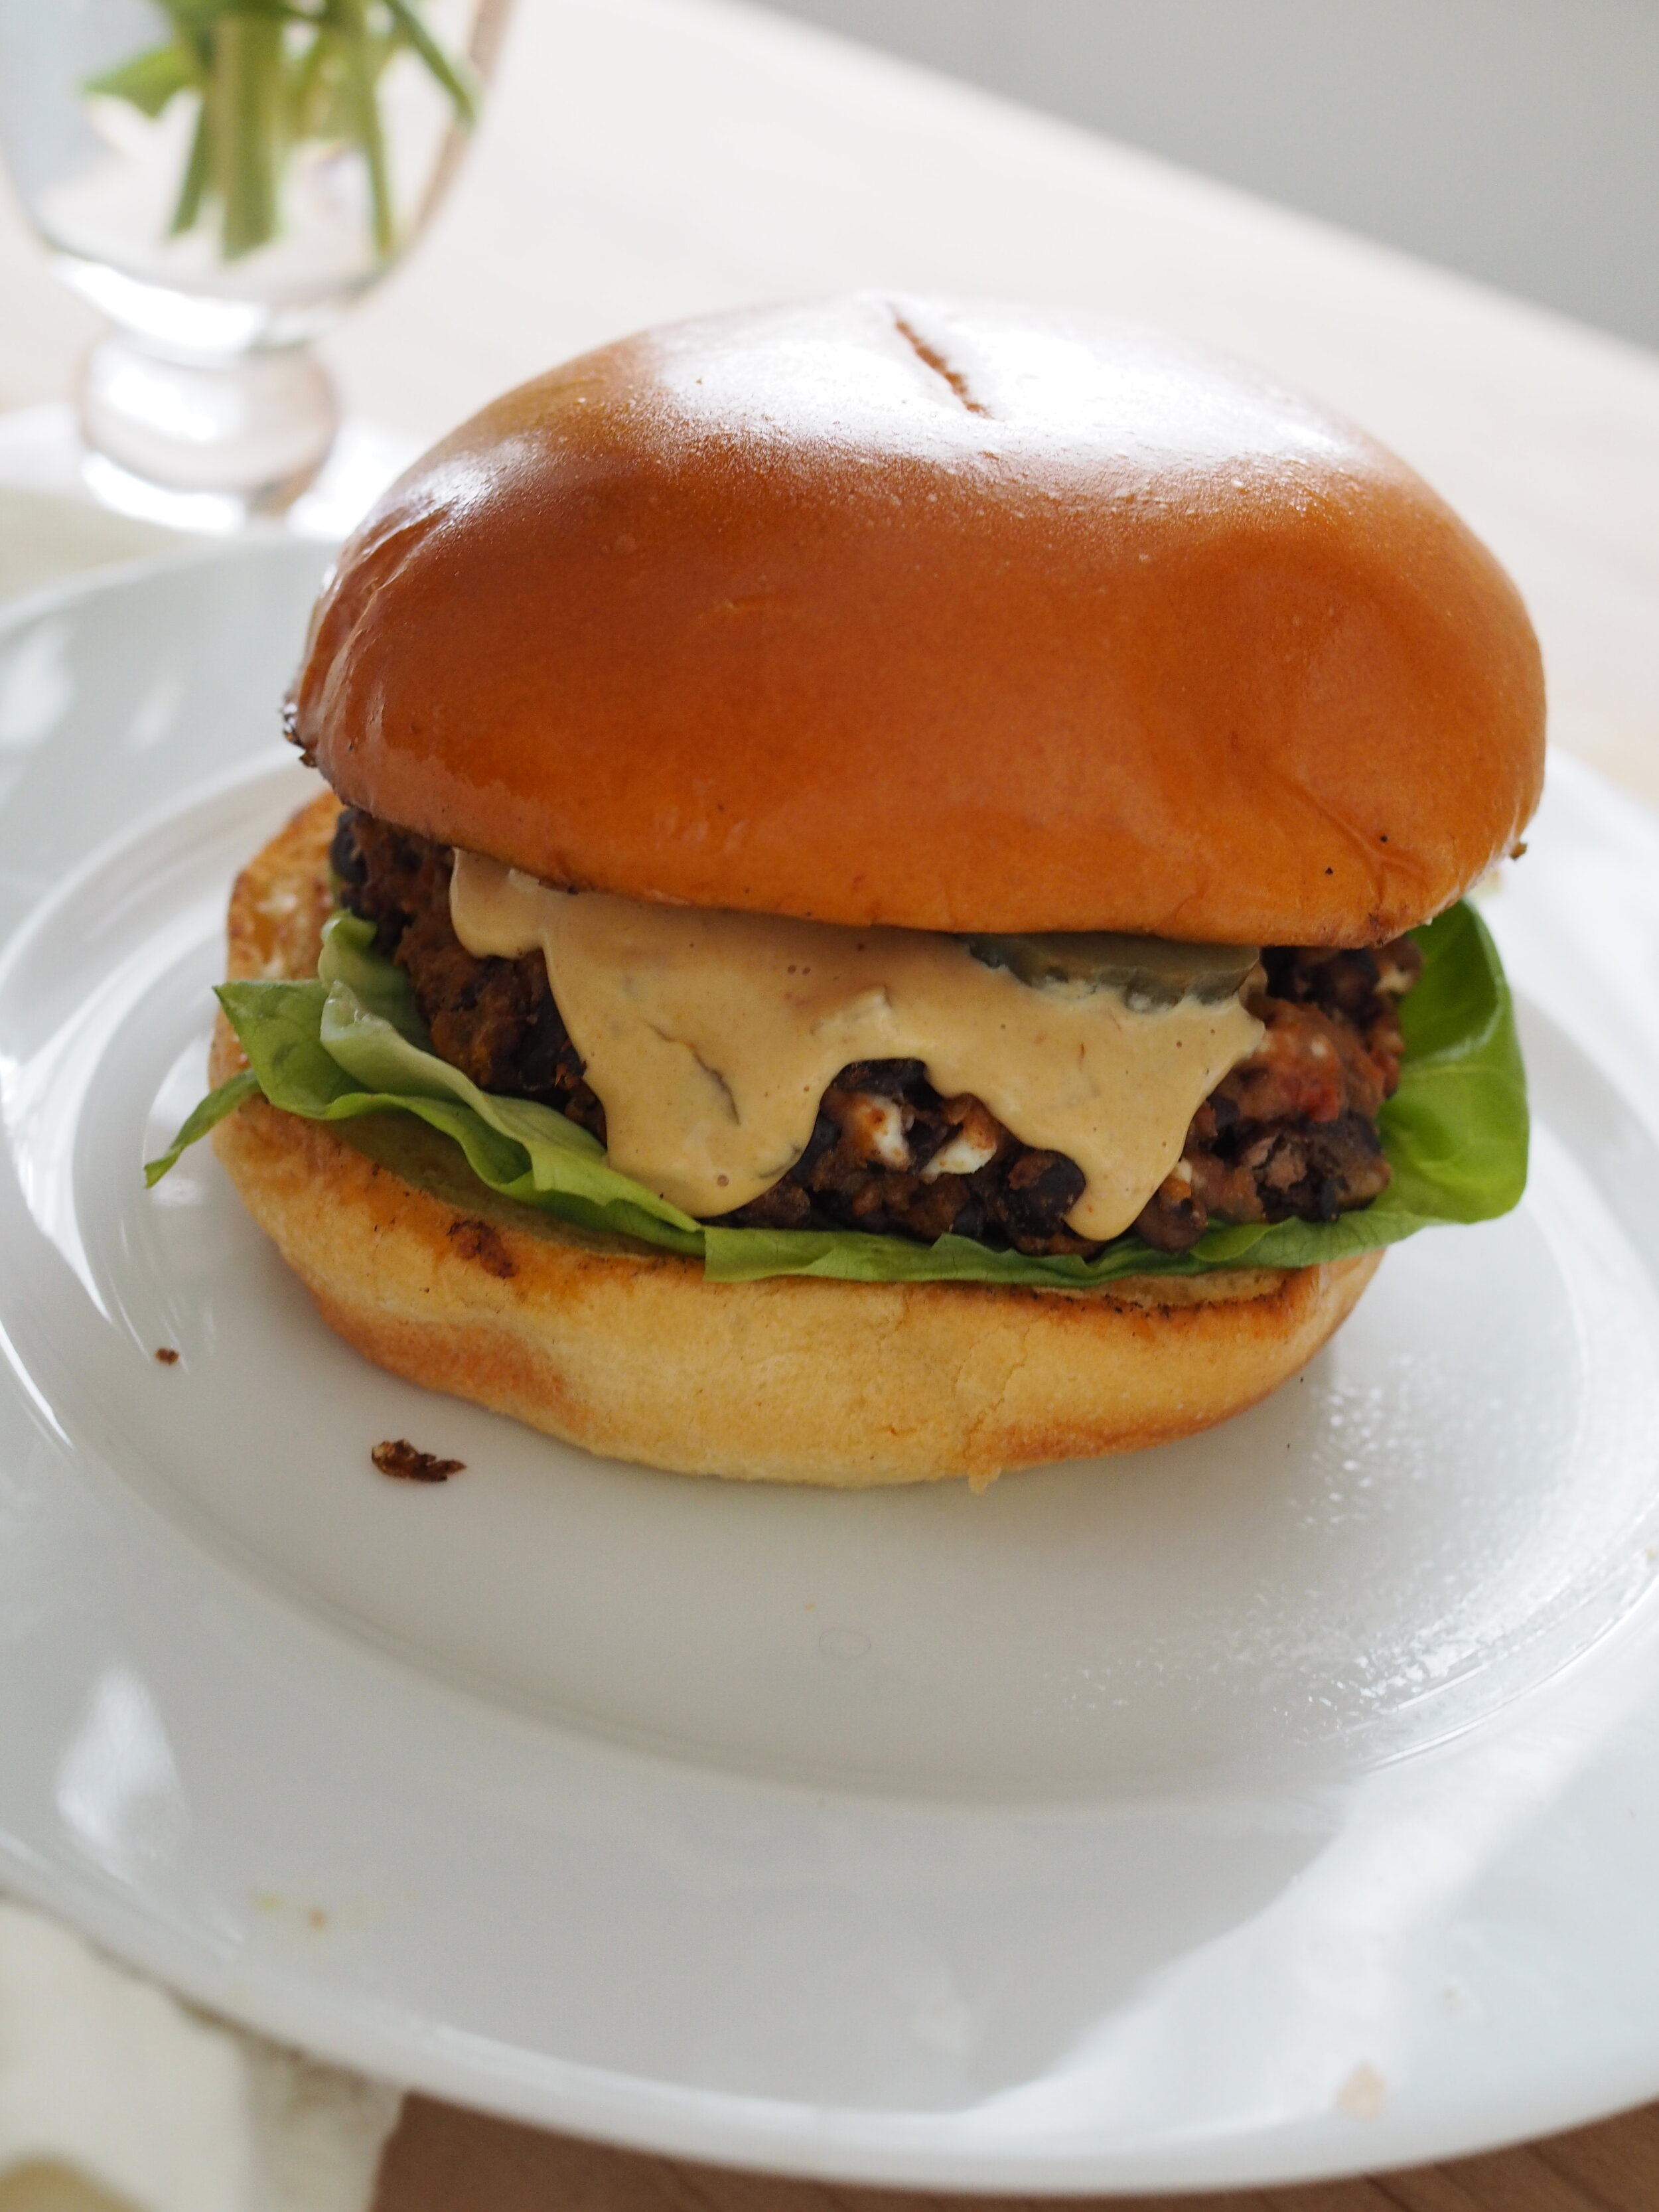 The best black bean burger served on a brioche bun with butter lettuce, pickles and fancy sauce